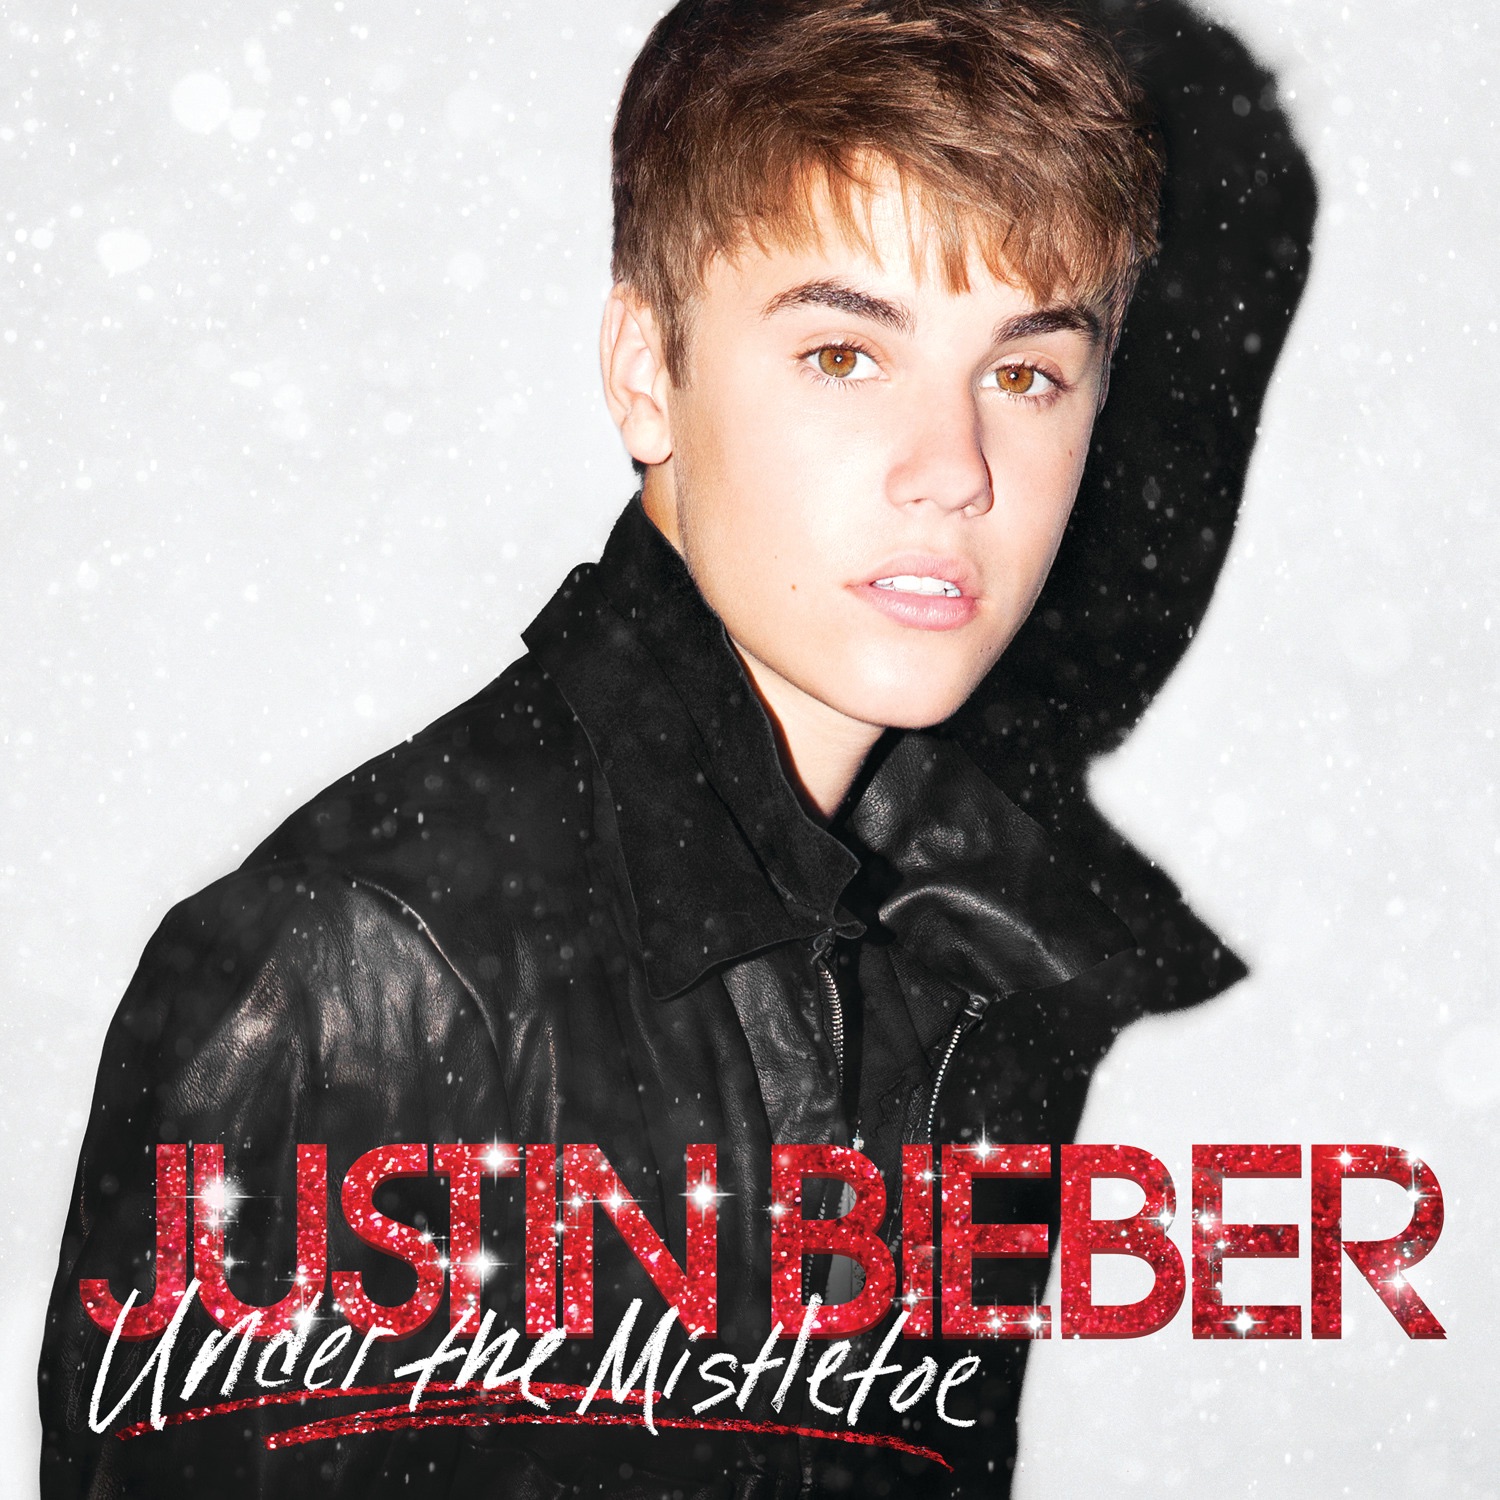 Only Thing I Ever Get For Christmas | Justin Bieber Wiki | FANDOM powered by Wikia1400 x 1400